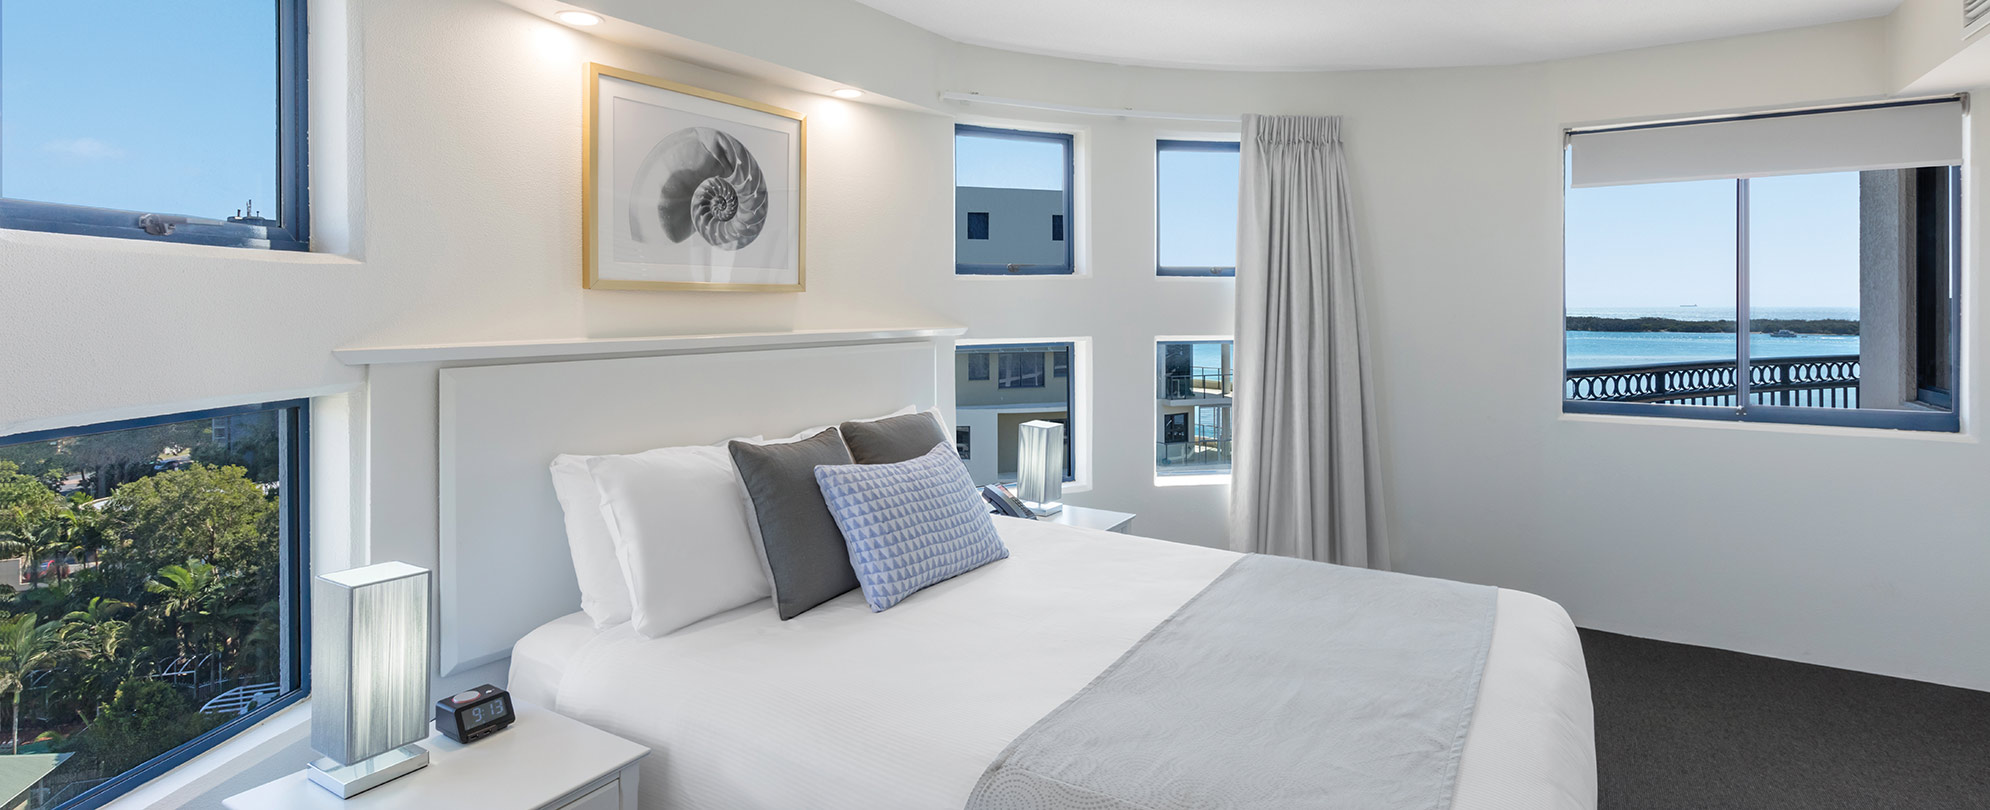 The master bedroom in a 1-bedroom suite at Club Wyndham Golden Beach.